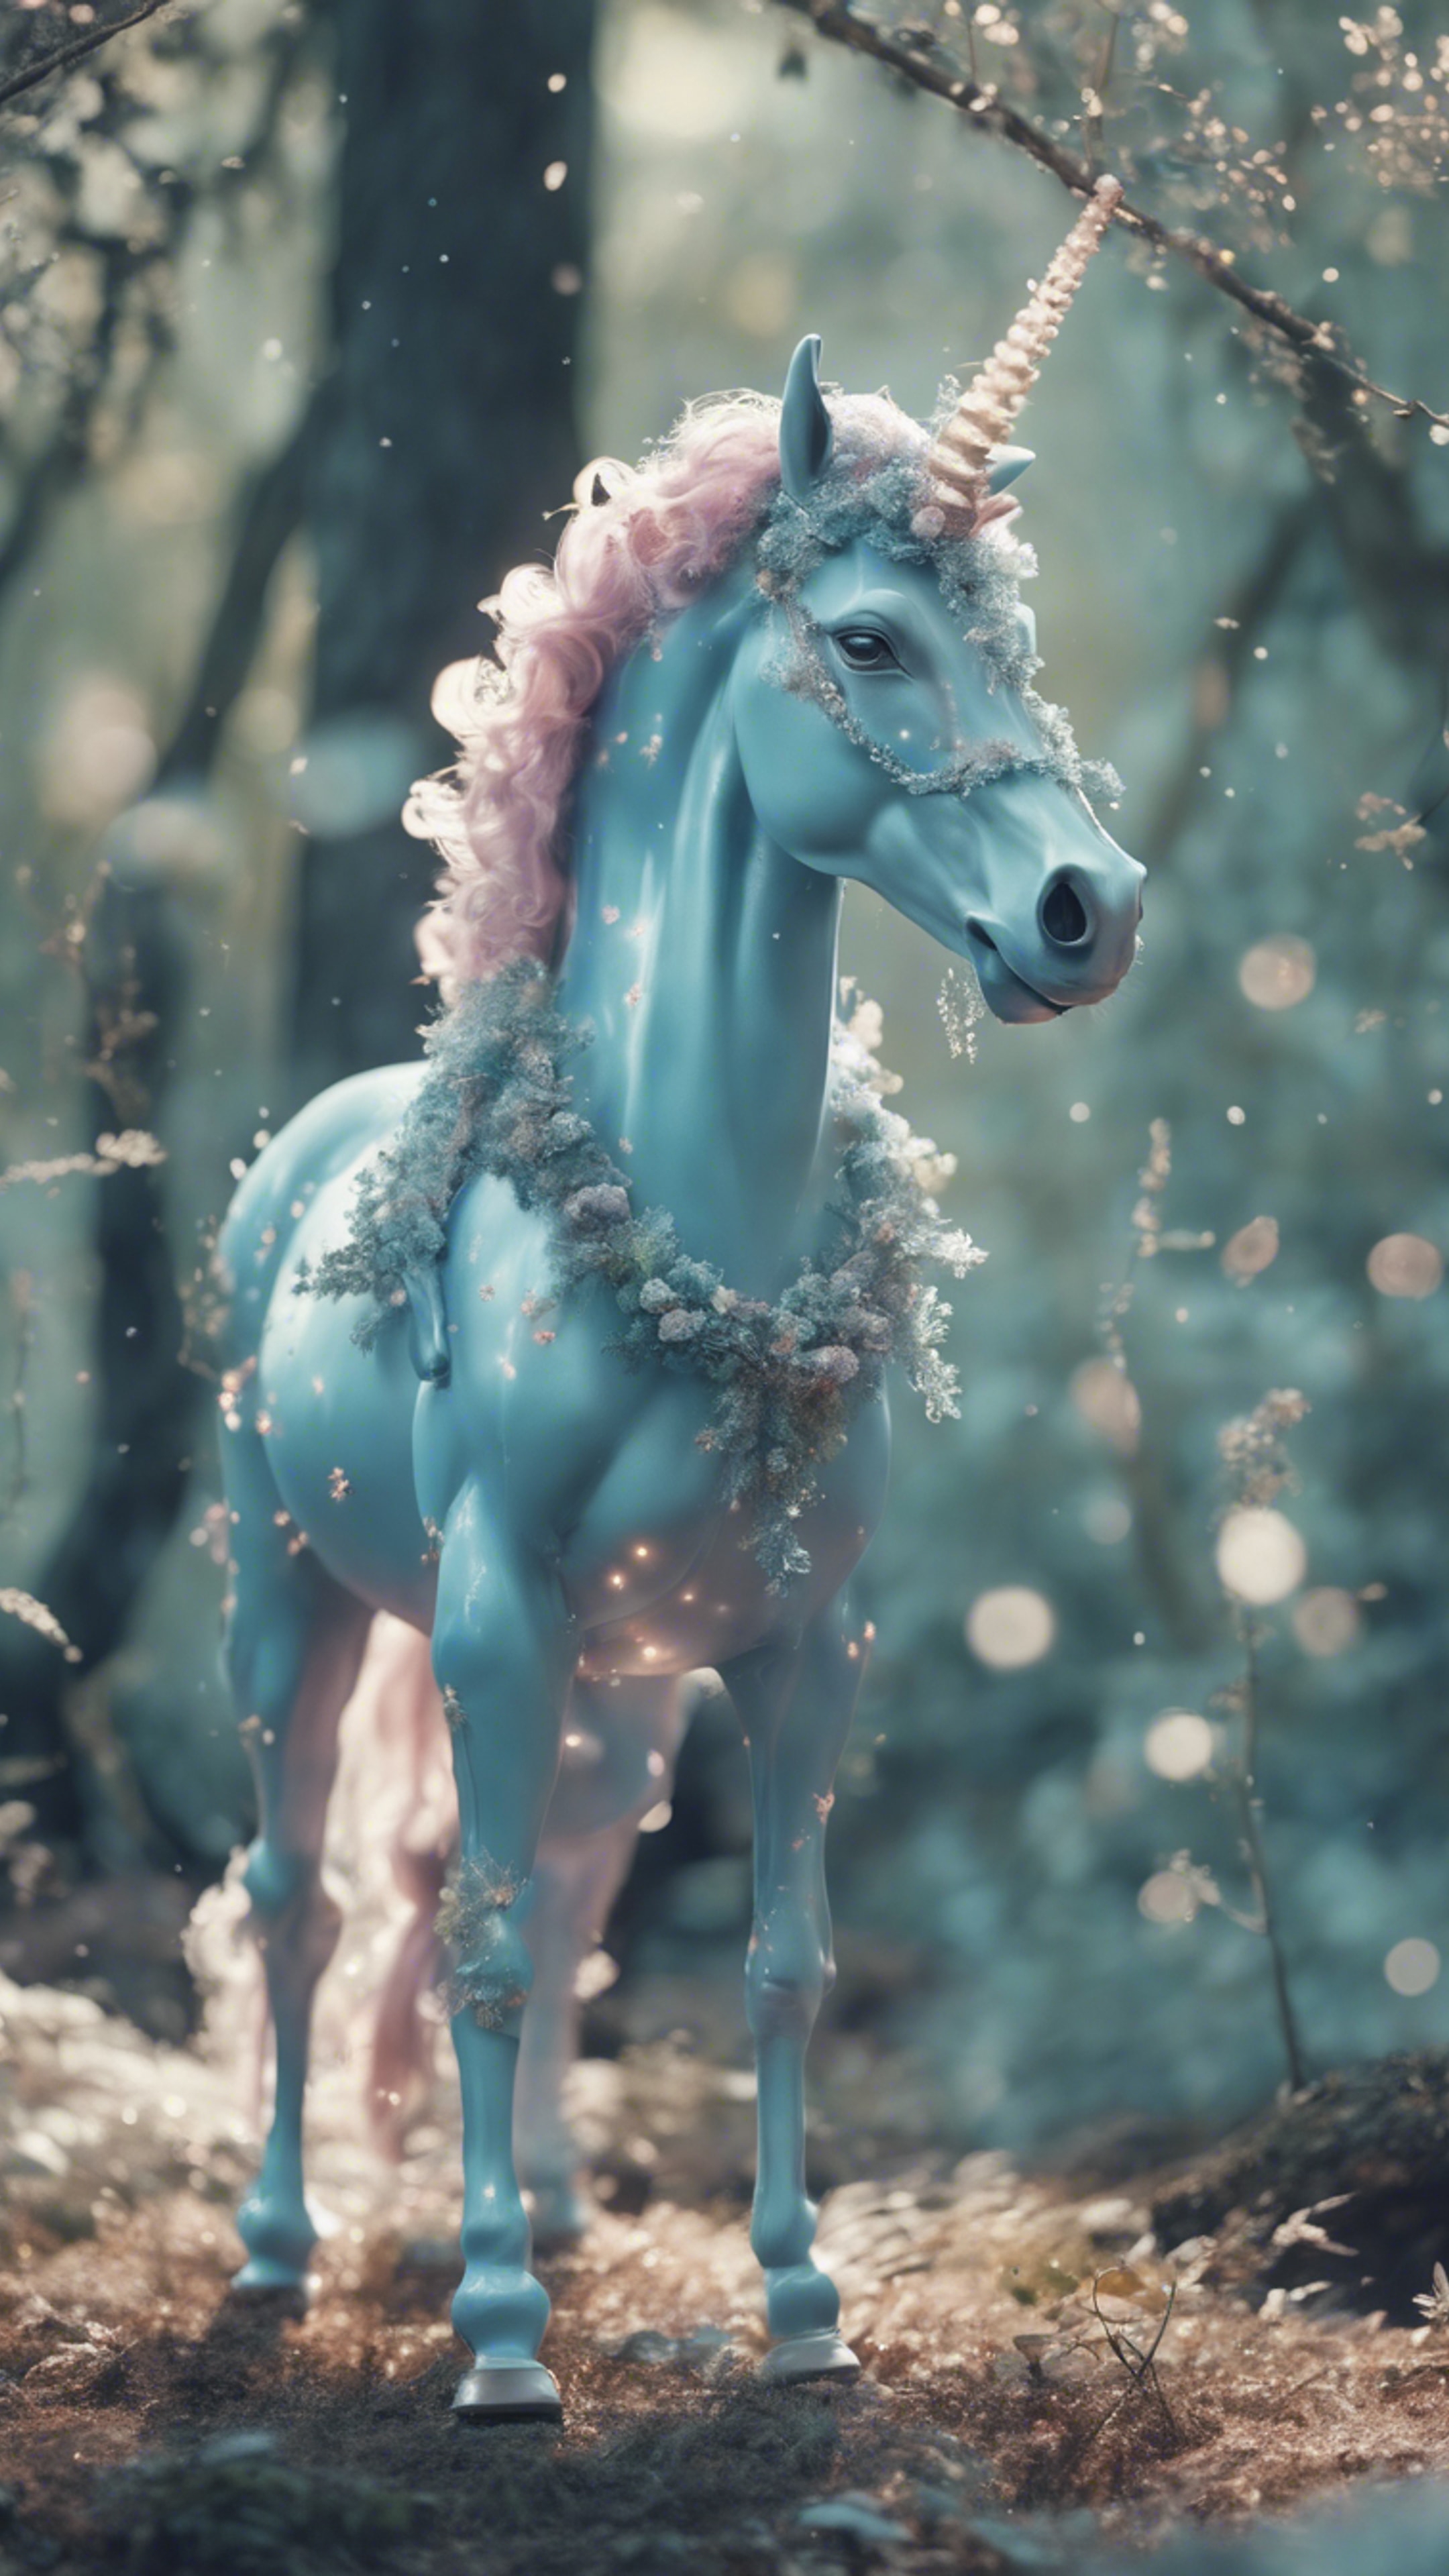 A whimsical pastel blue unicorn standing in a magical forest. วอลล์เปเปอร์[9fc4aee892994beaa25a]